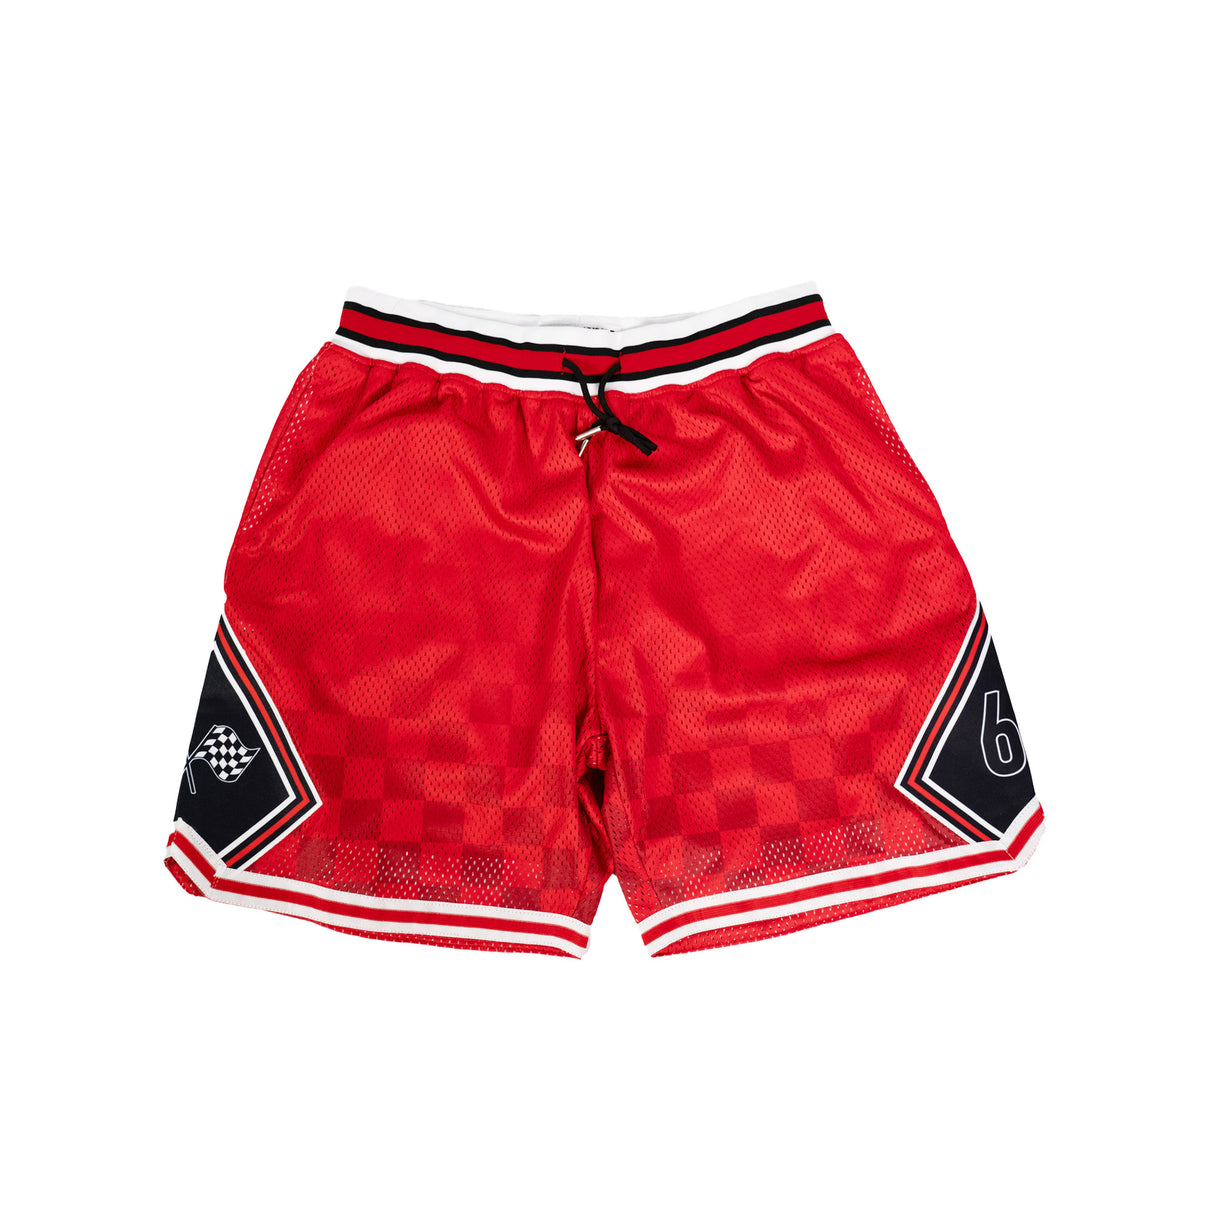 BOOGIE NIPSEY HUSSLE BASKETBALL SHORTS (RED)